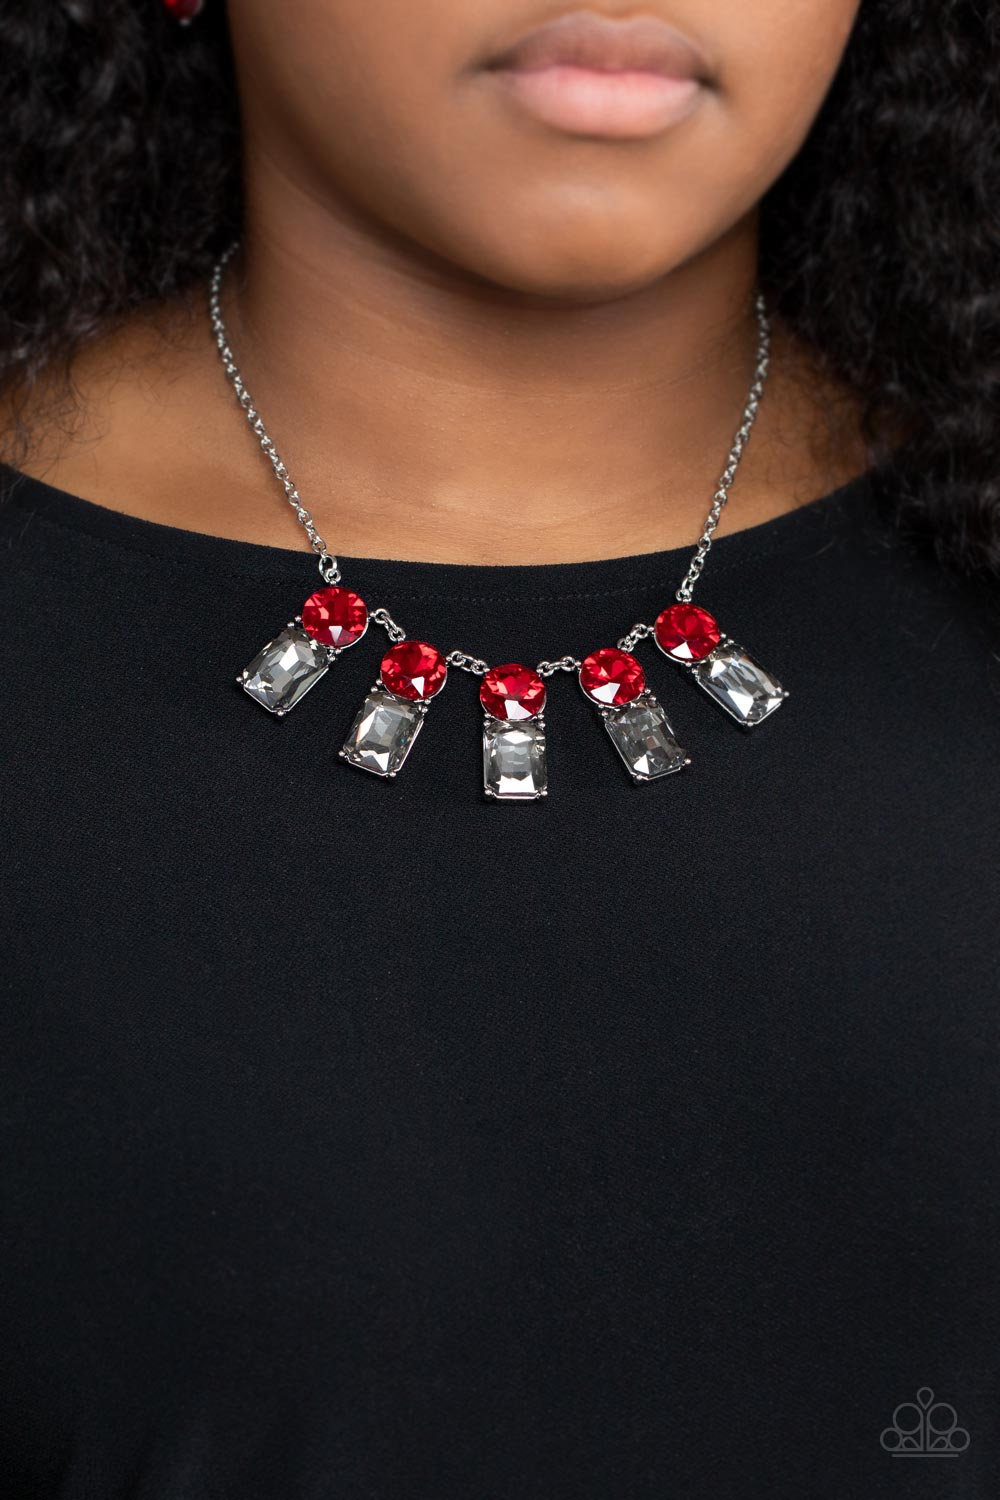 Paparazzi Celestial Royal Red Necklace online at AainaasTreasureBox. Subscribe and Save!